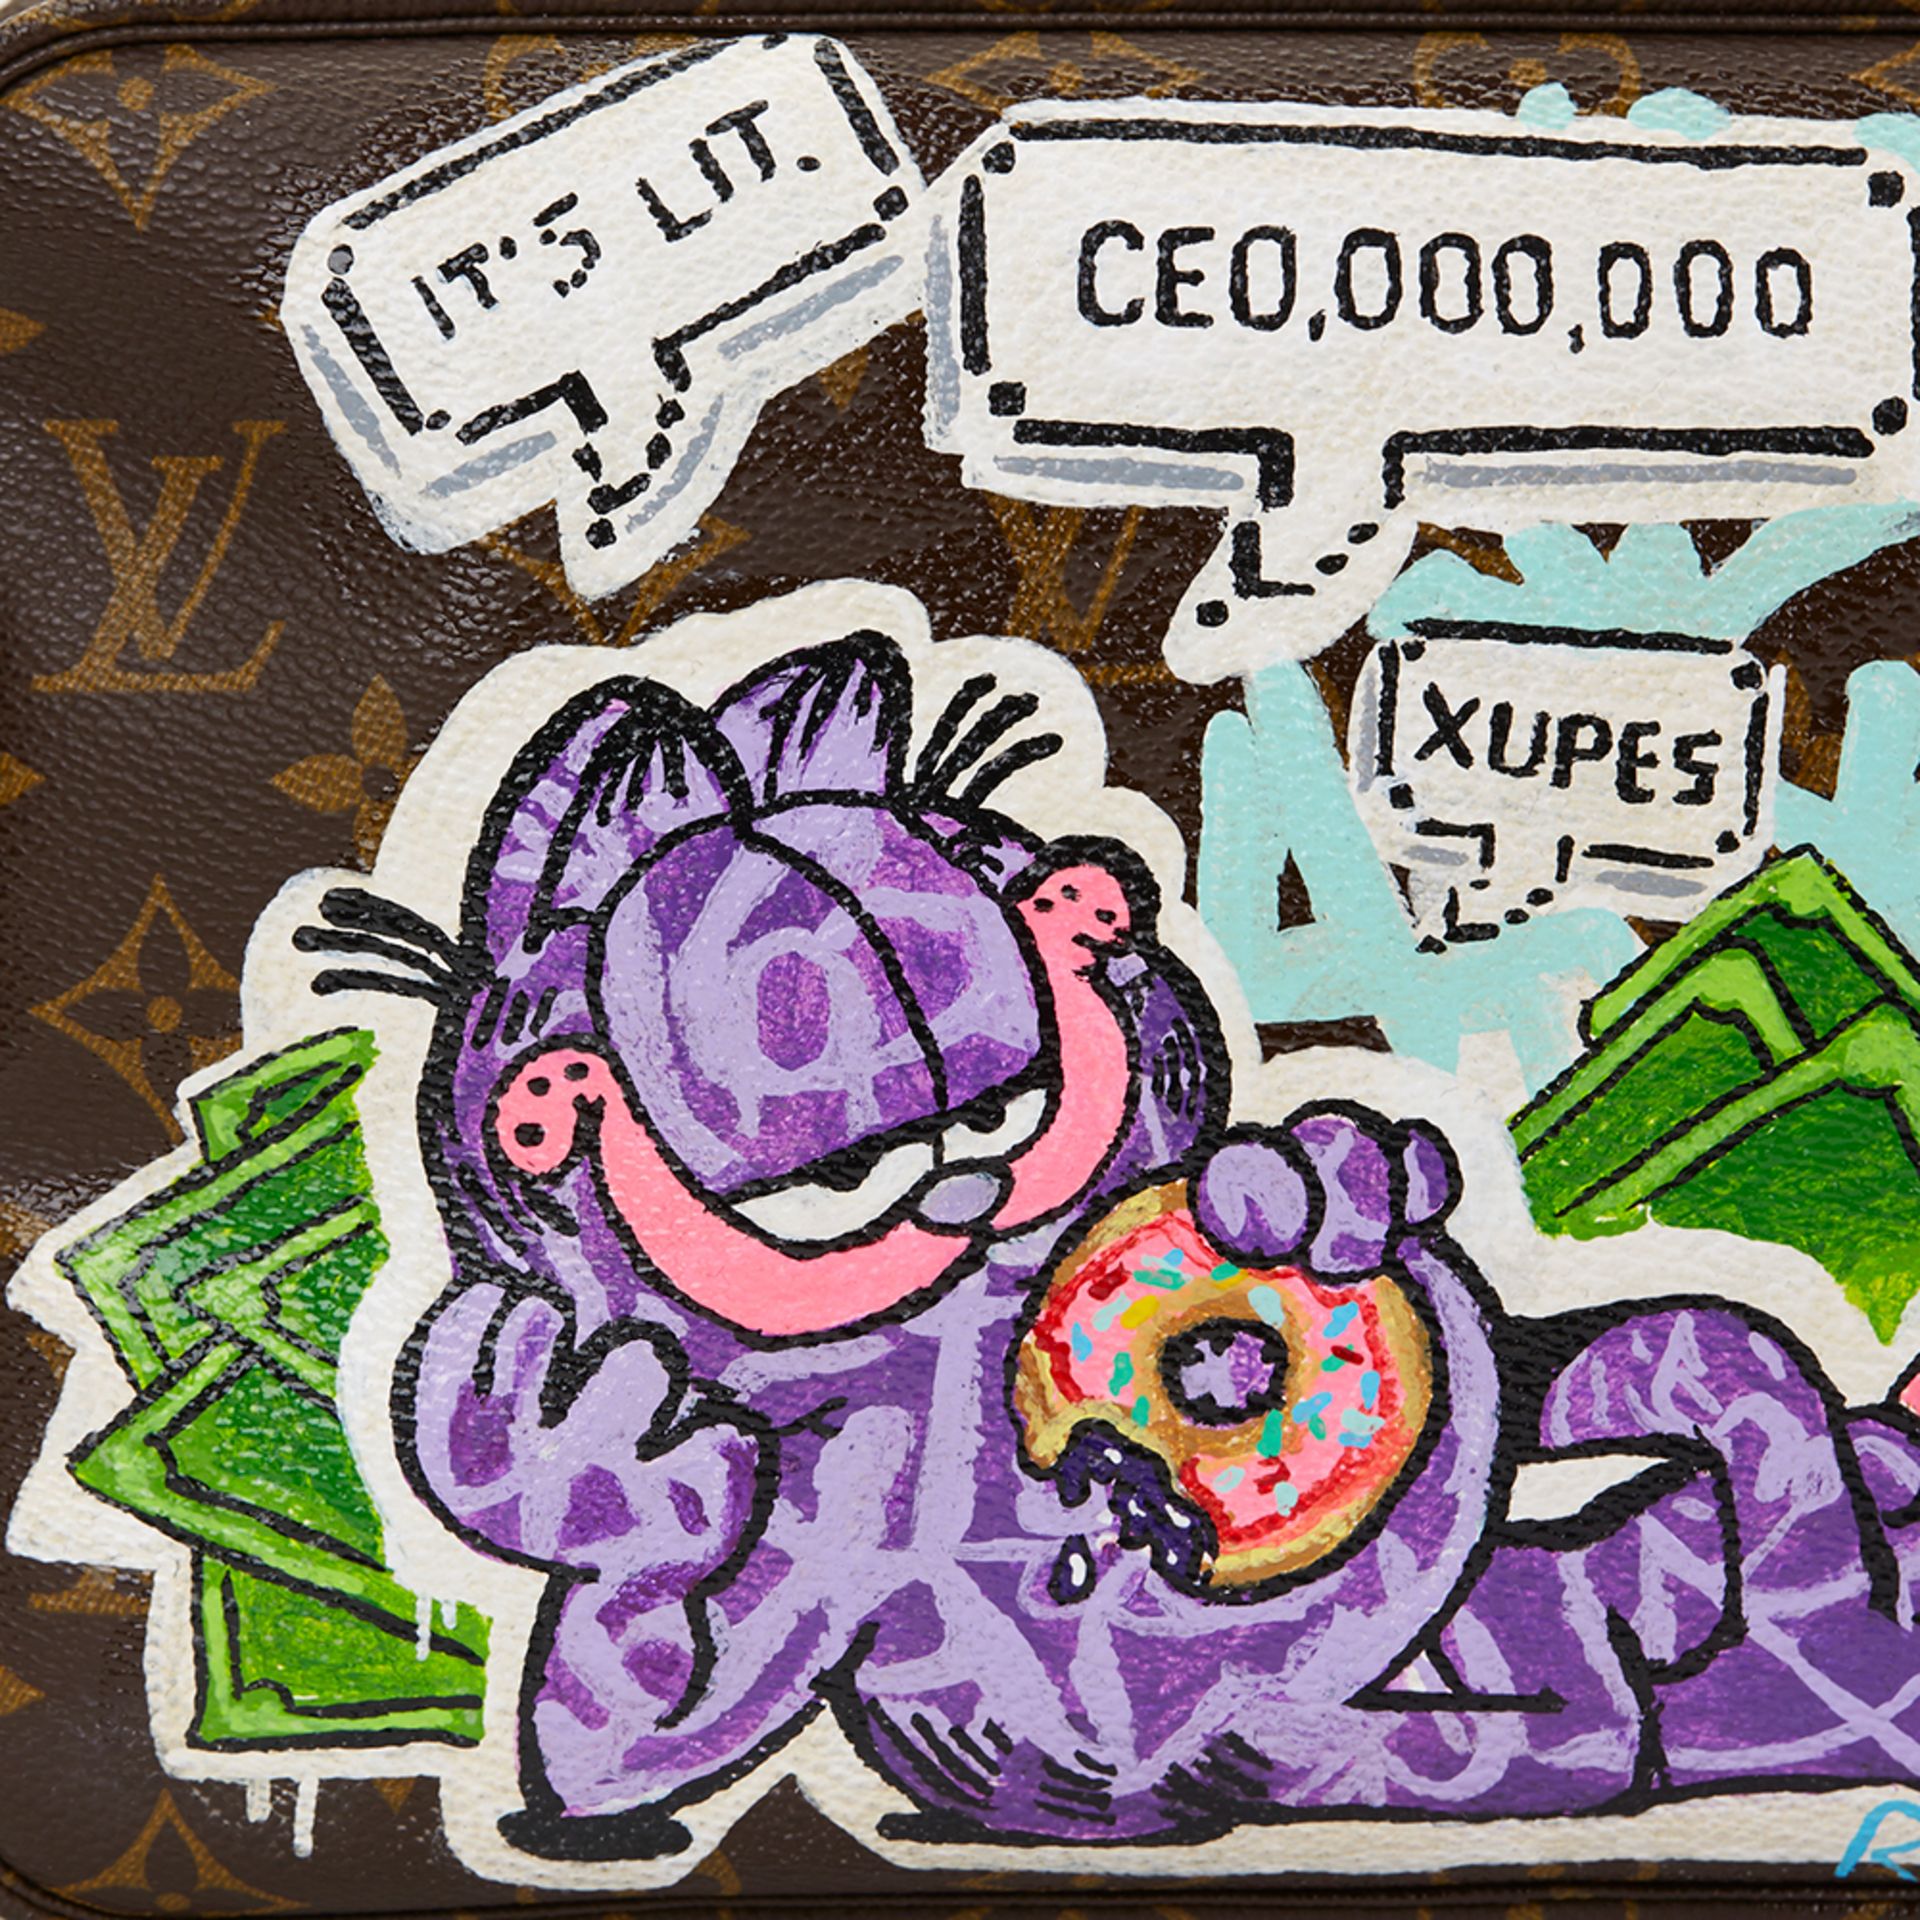 HB1180 Louis Vuitton Hand-painted 'Ca$h Me Outside' X Year Zero London Toiletry Pouch - Image 6 of 9